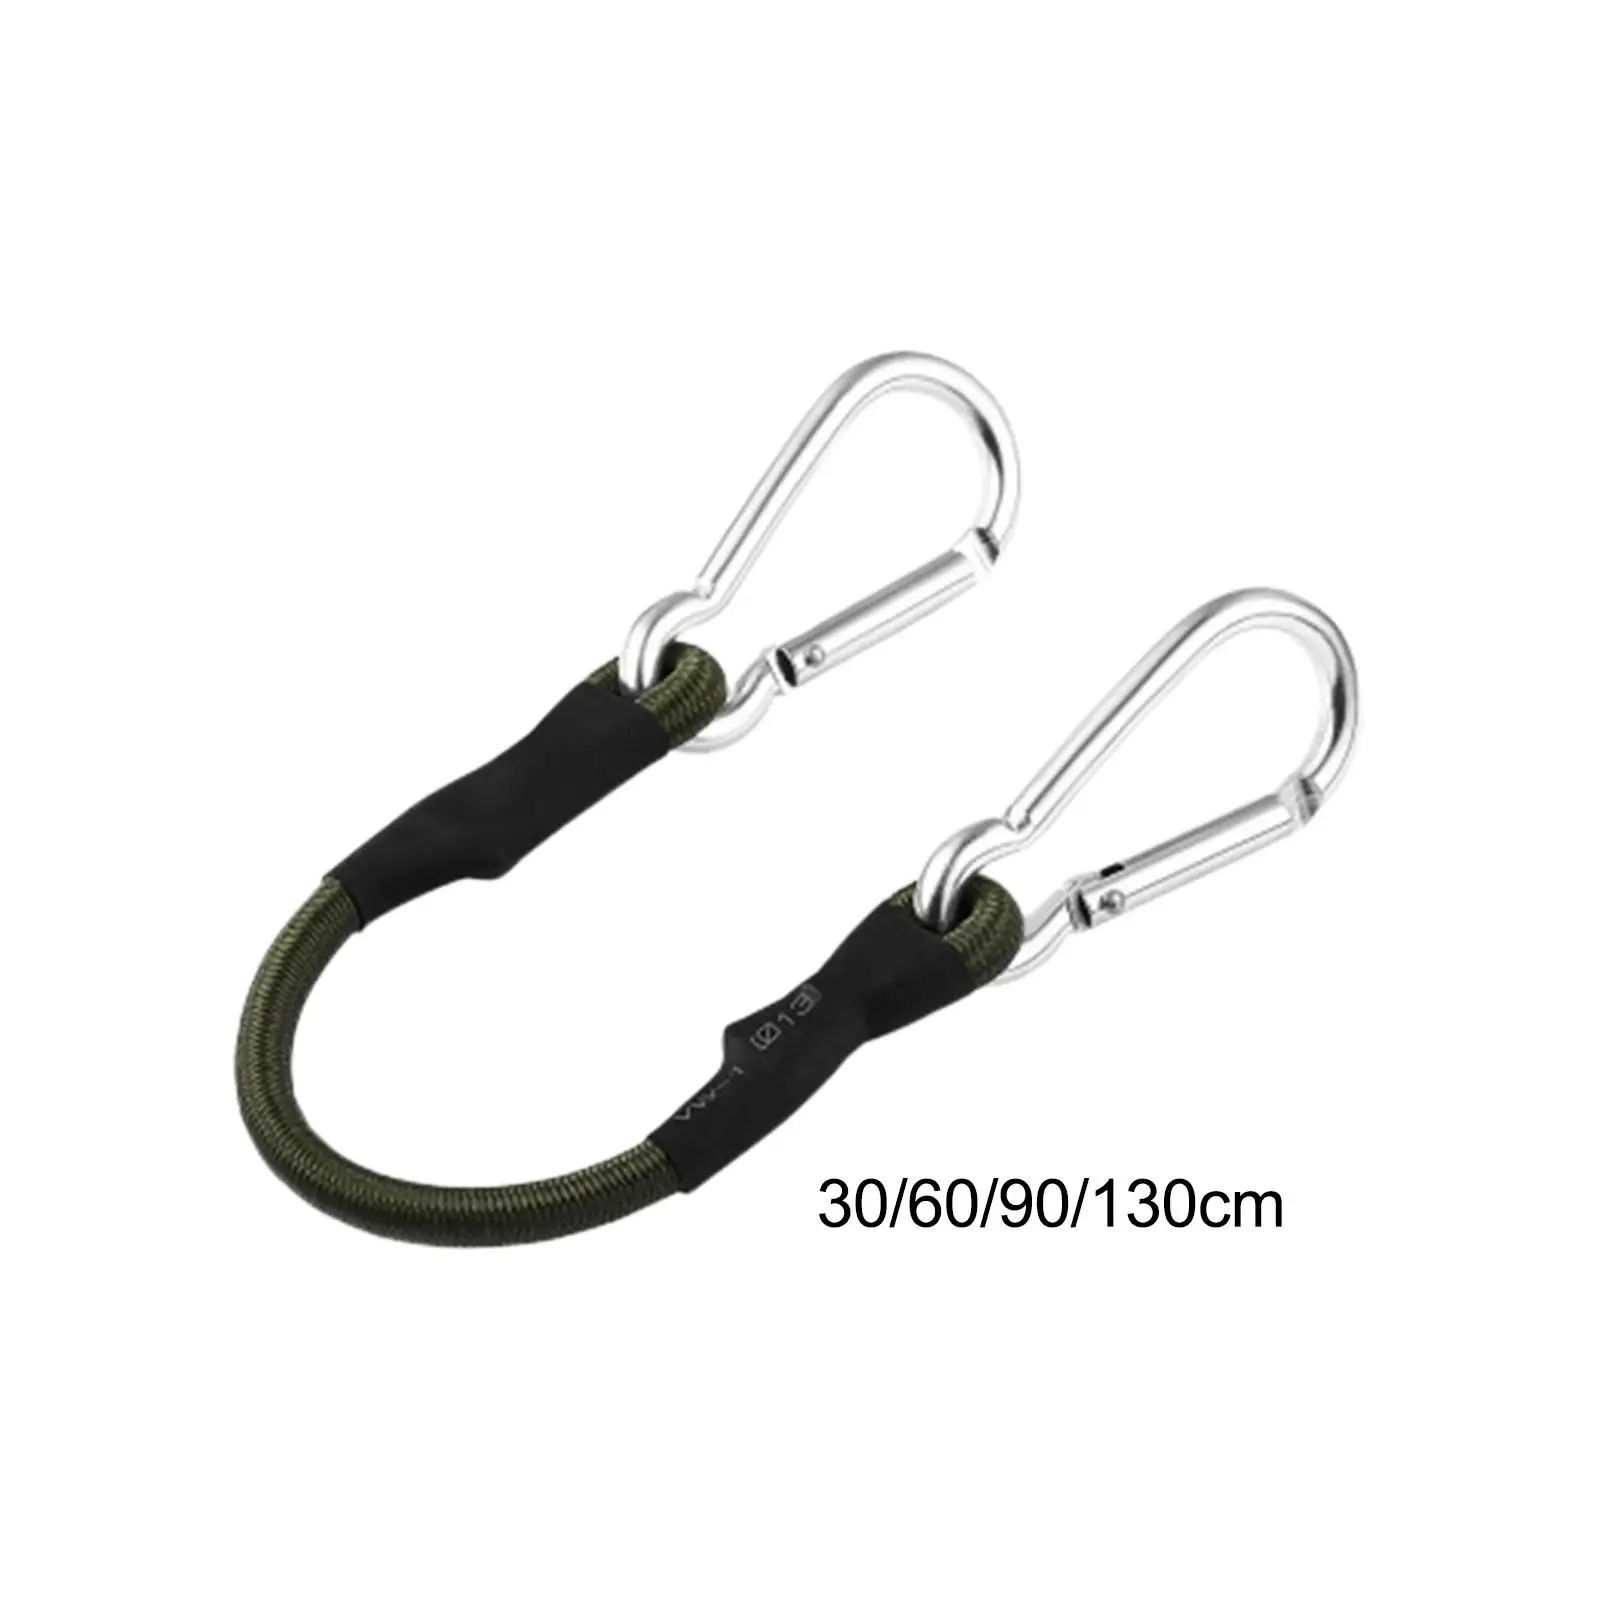 

Bungee Cord with Carabiner Clip Luggage Straps Metal Buckle Mult Use Ties for Camping Rvs Trunks Transporting Car Accessory